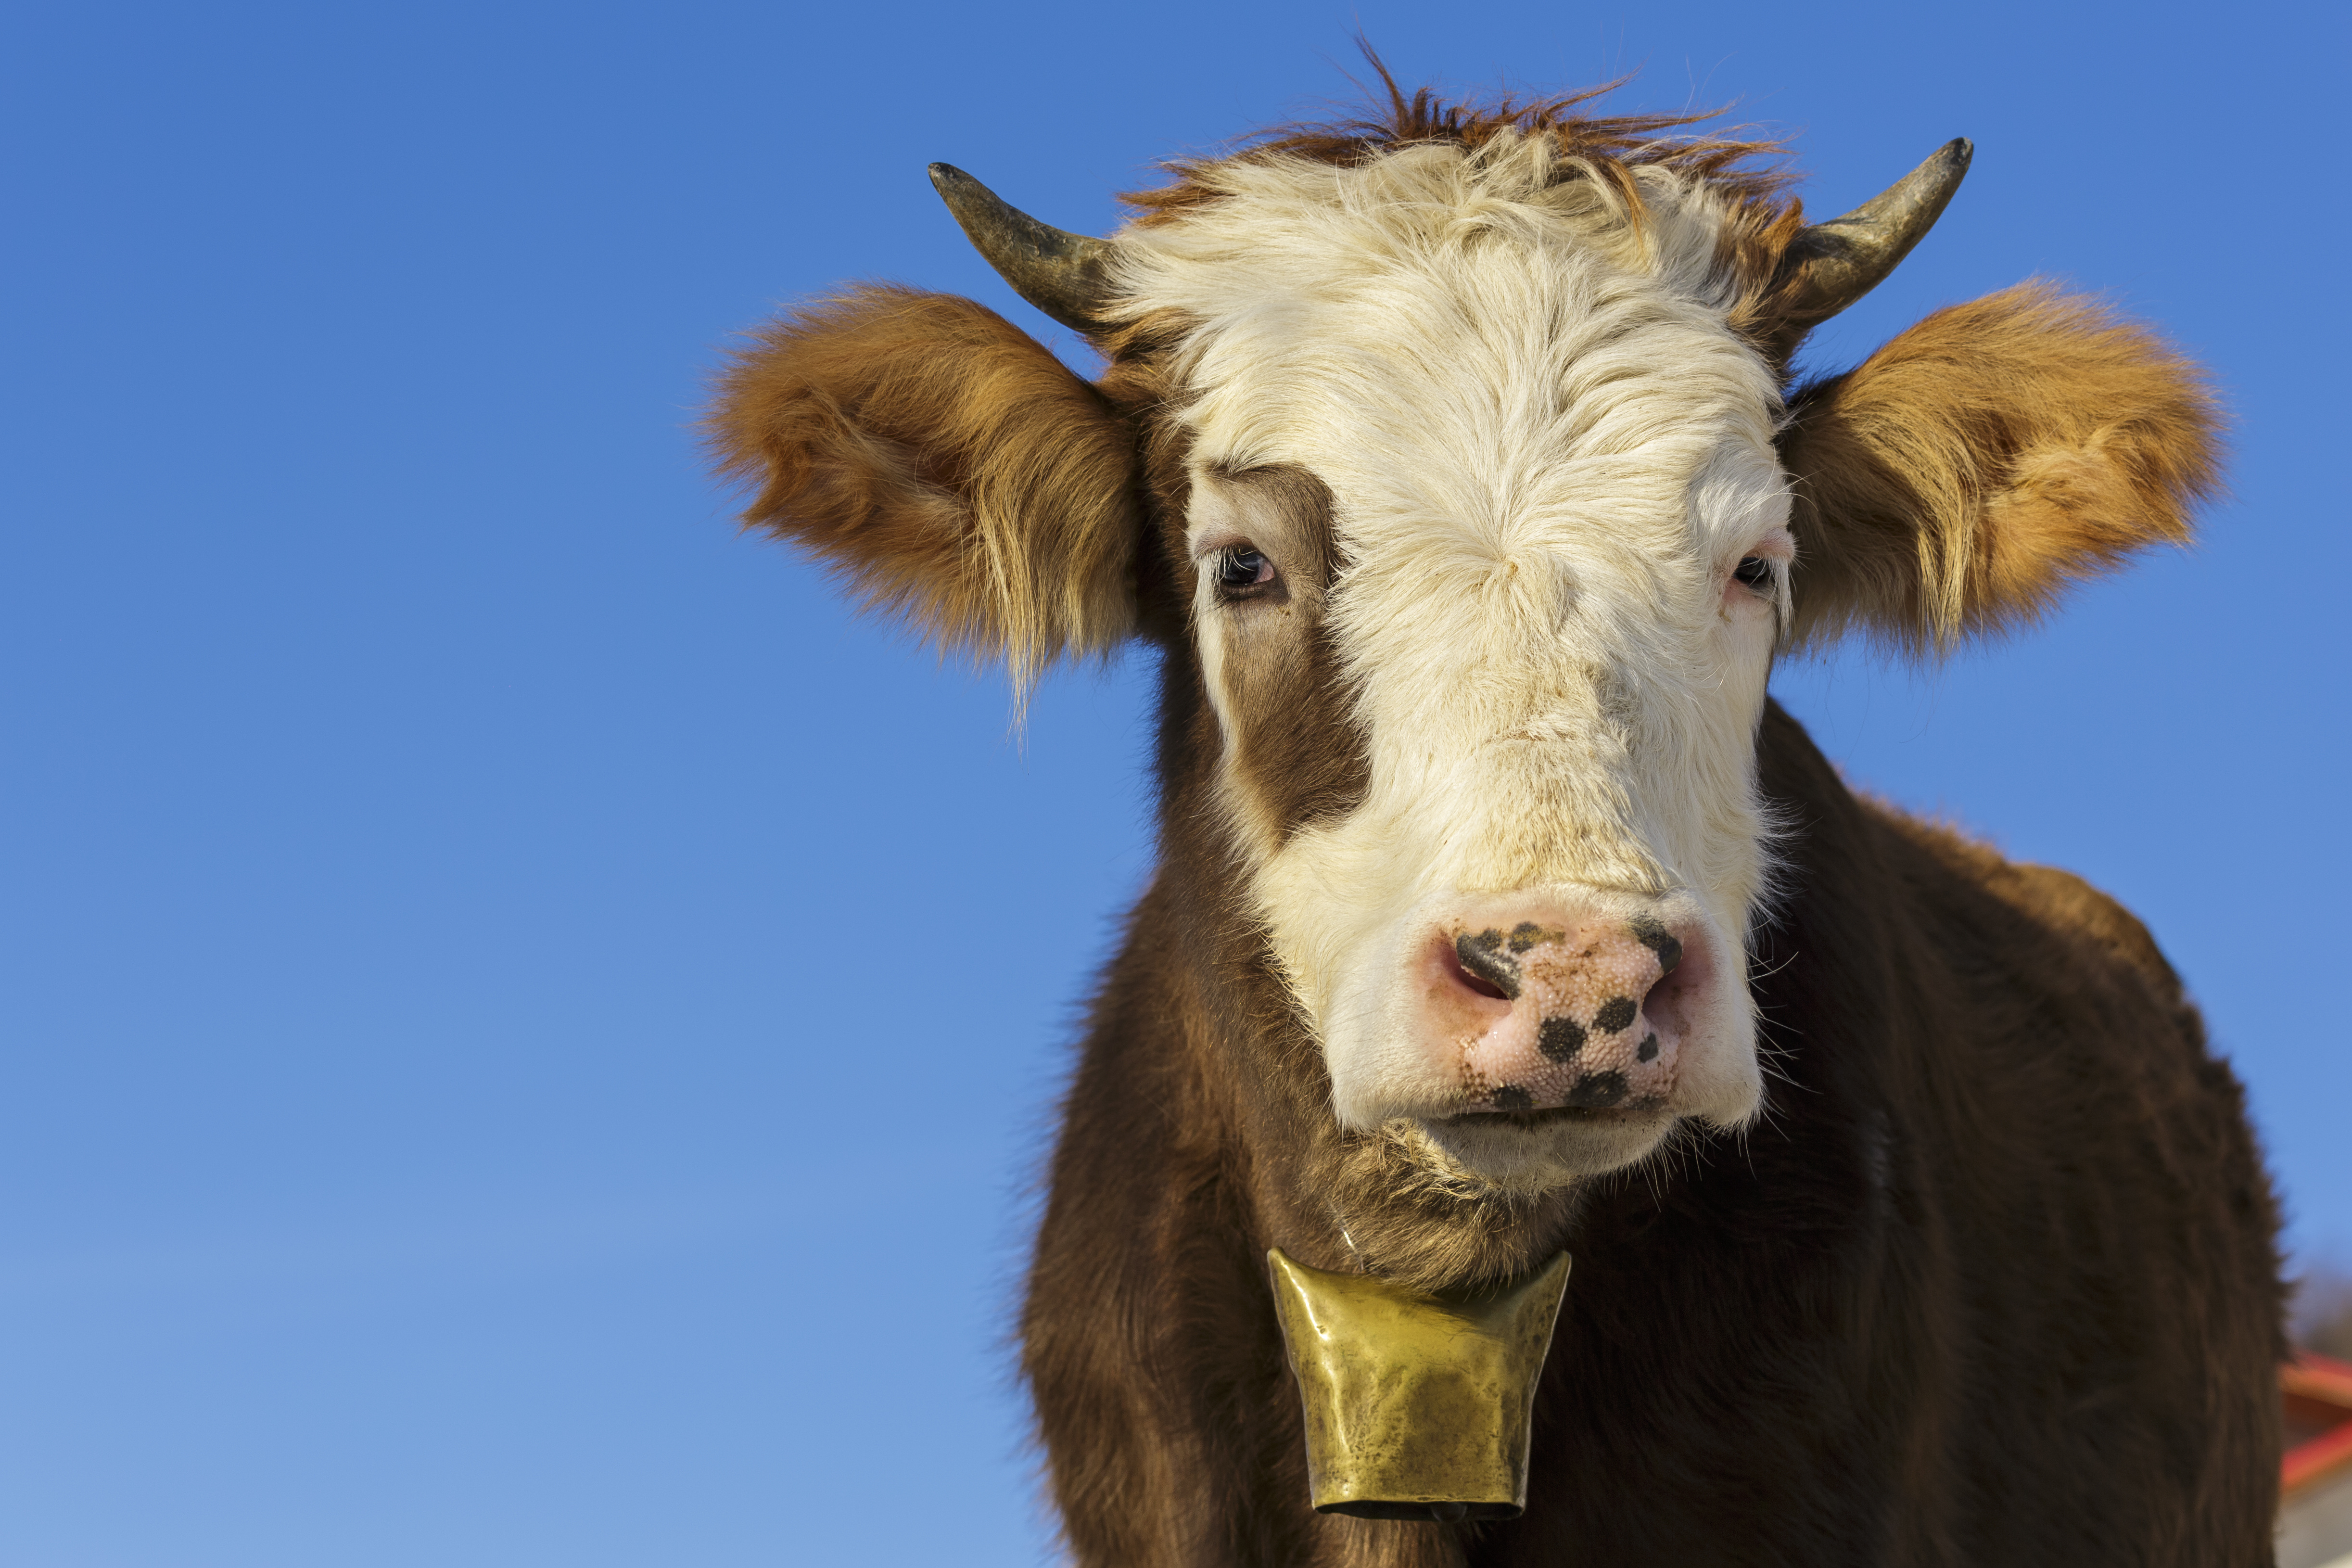 Shaggy brown-and-white cow with small horns looking at camera, wearing brass cowbell around its neck. Background of blue sky.